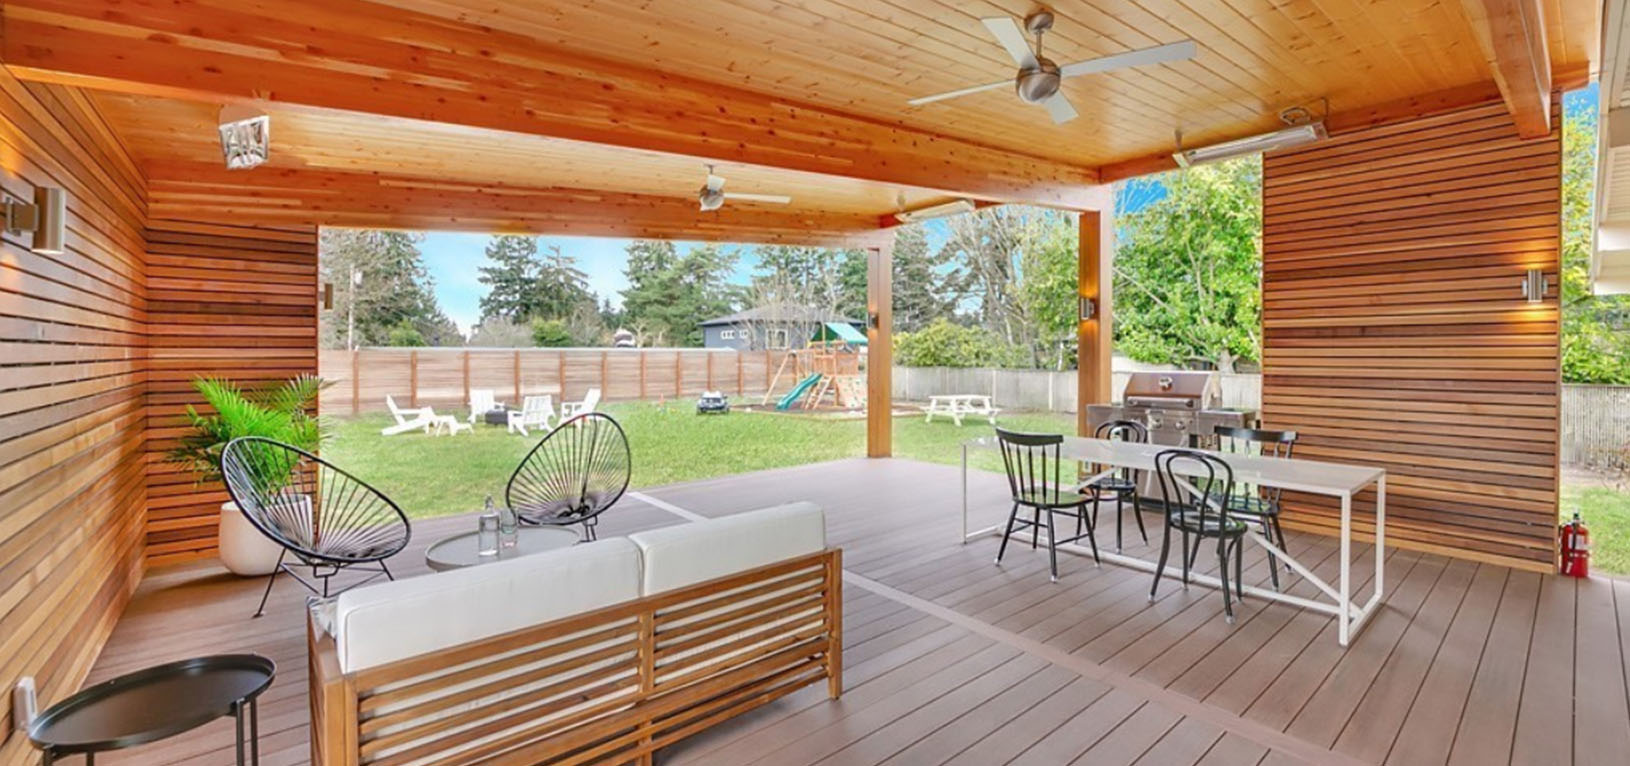 Renton Remodeling Contractor, Outdoor Living and Home Additions